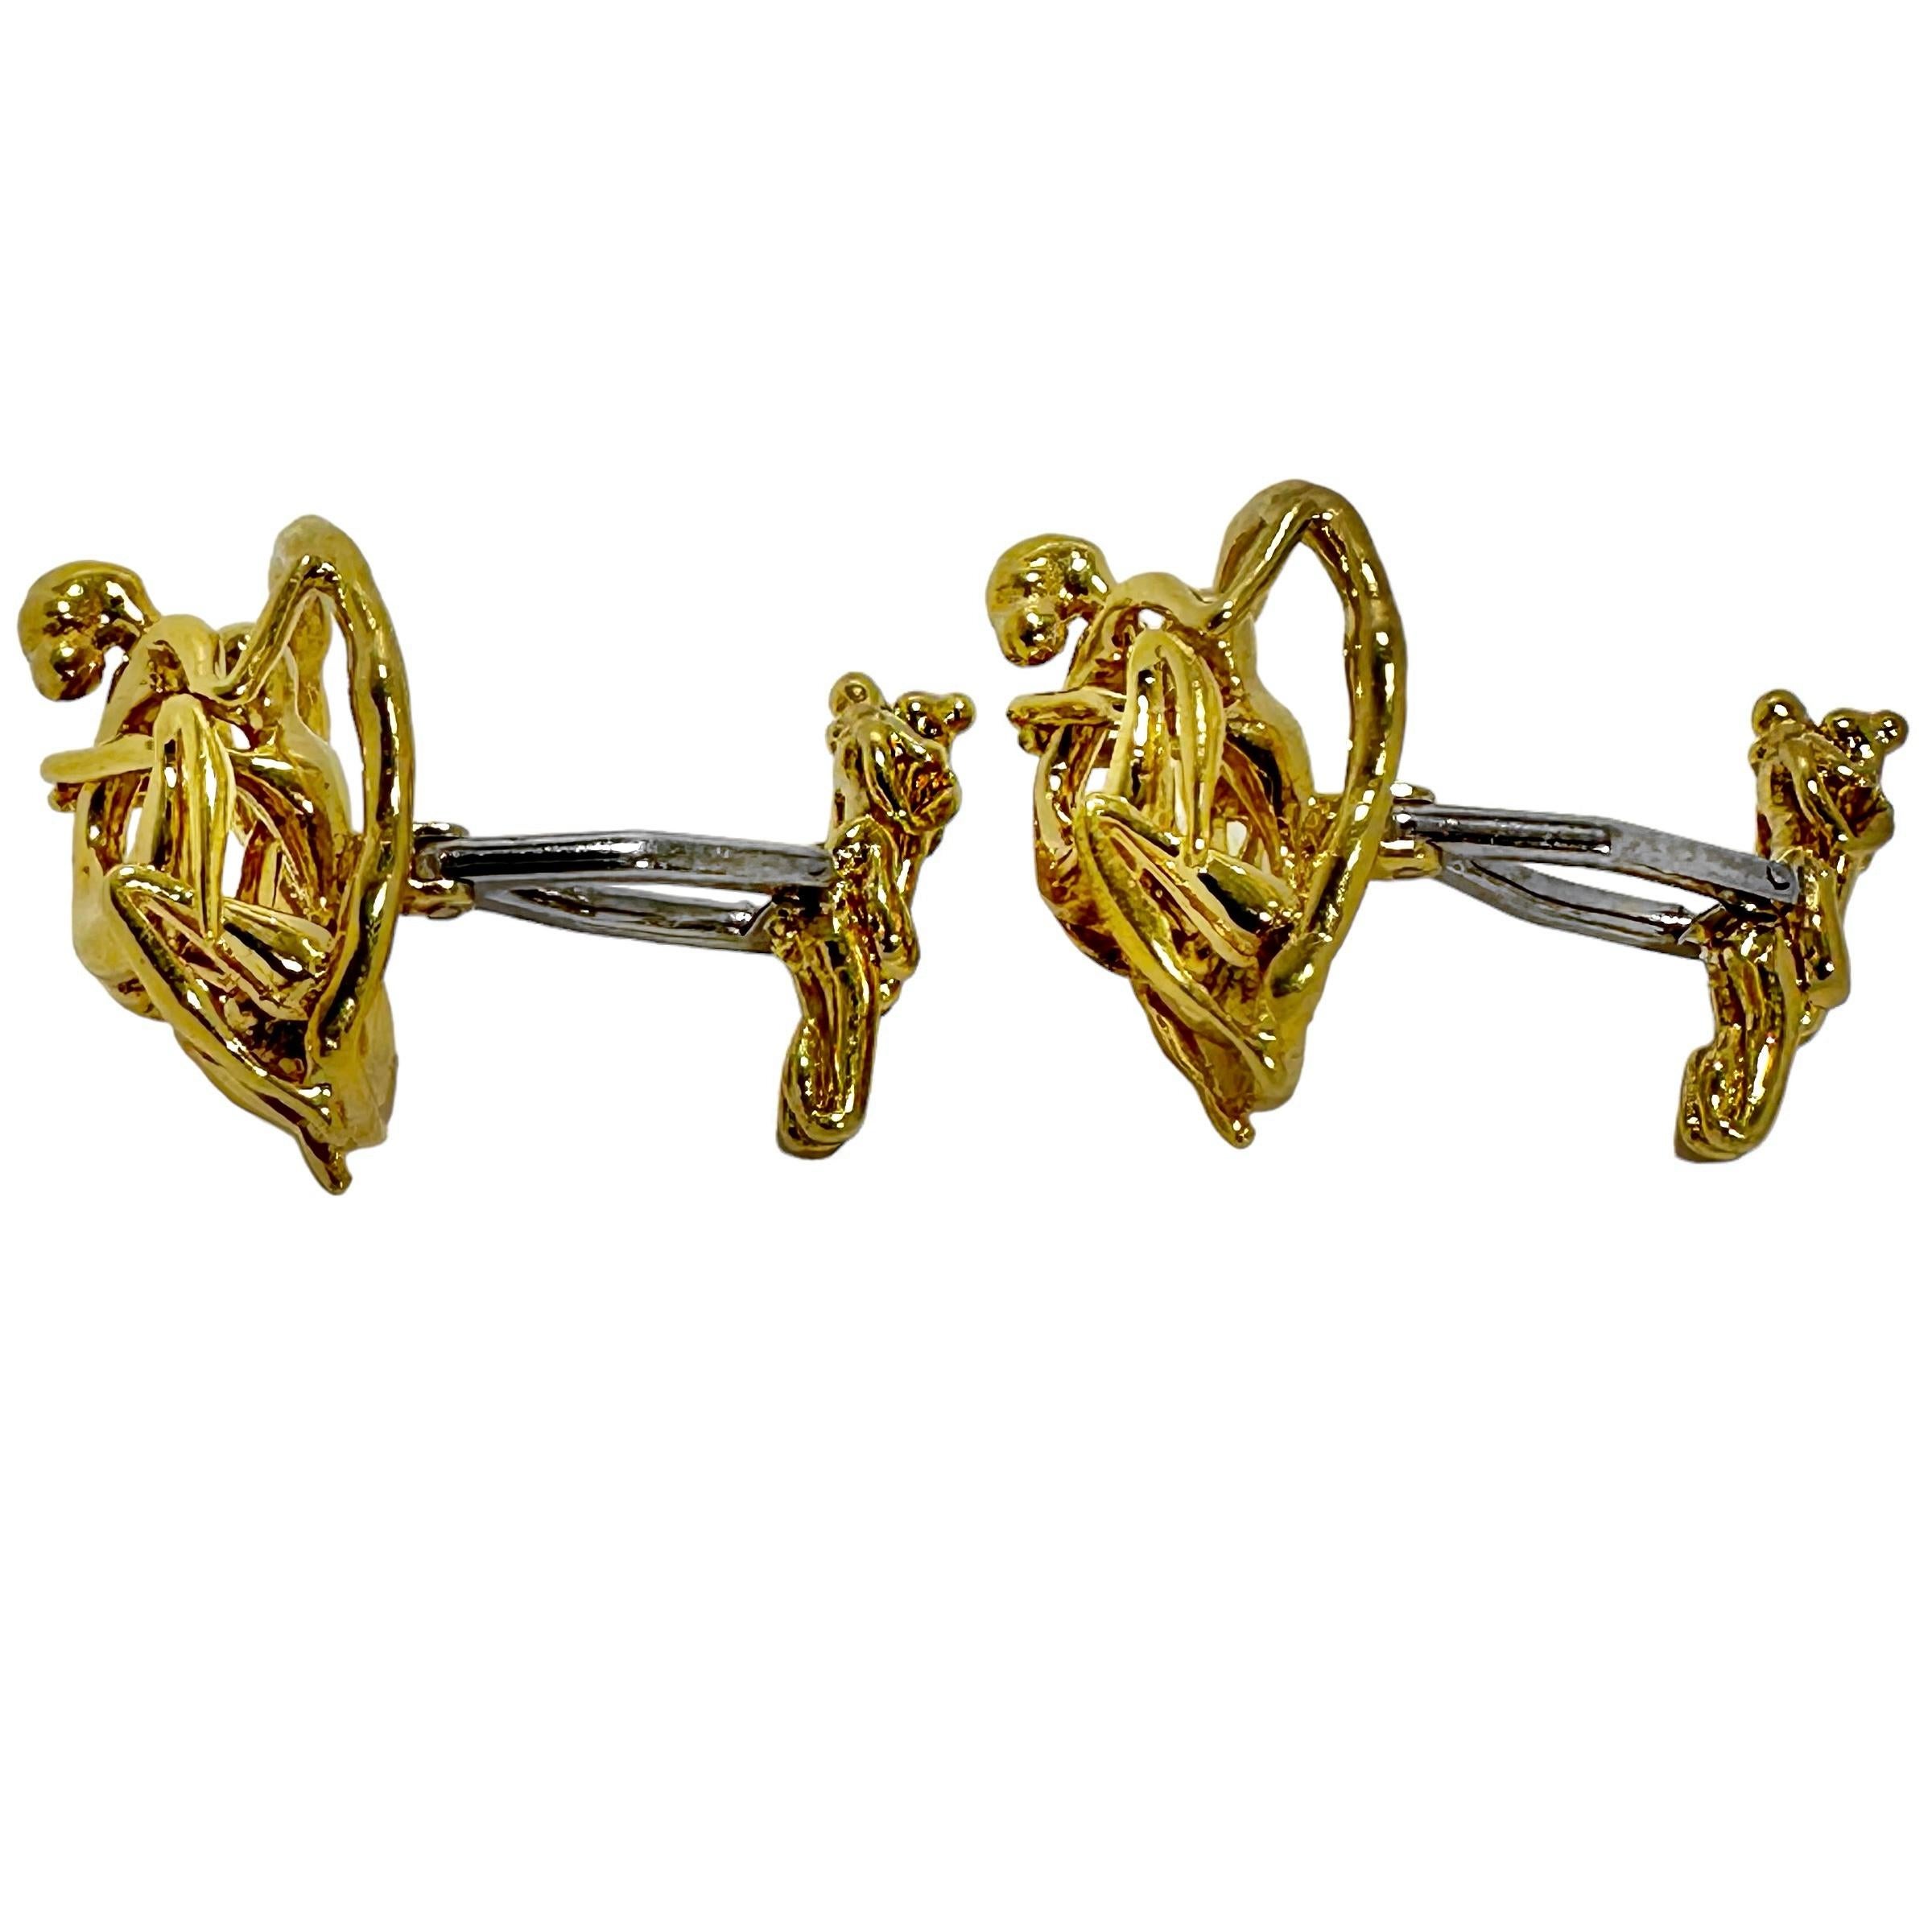 Men's Mid-20th Century French 18k Yellow Gold Artisan Hand Crafted Erotic Cuff Links For Sale